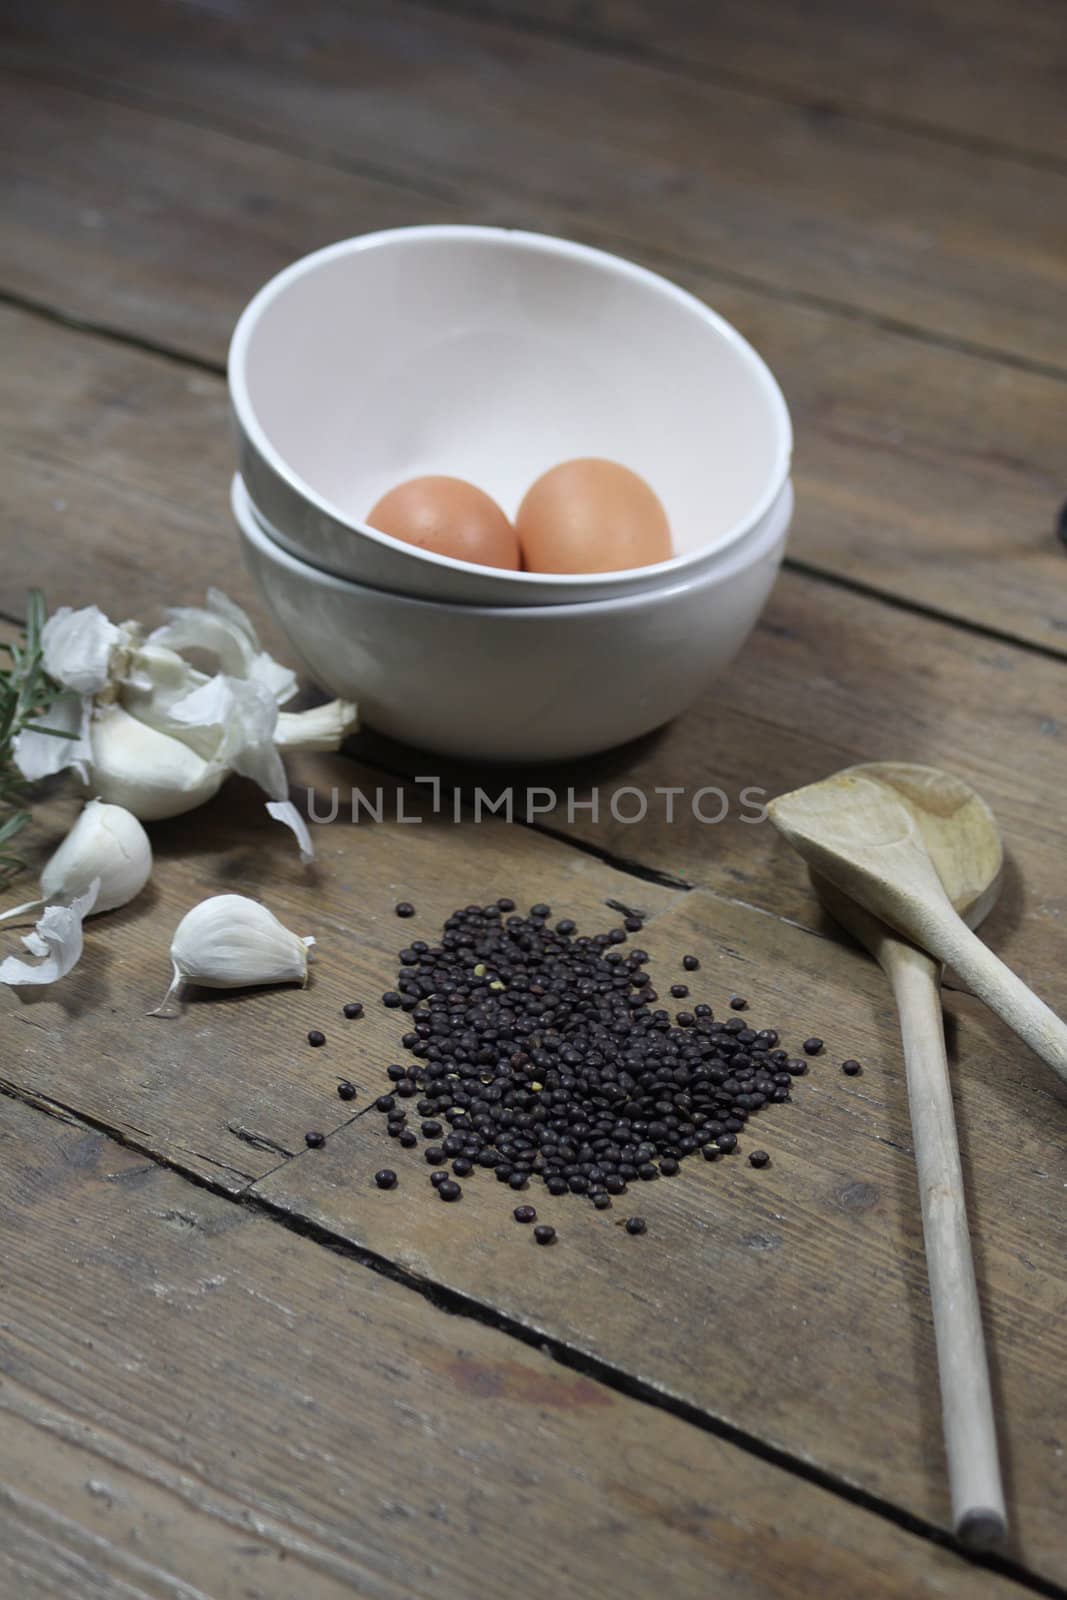 Kitchen ingredients comprising of brown eggs in a white bowl, garlic, fresh rosemary and black lentils. All set on a portrait format against a wooden background with two wooden spoons.